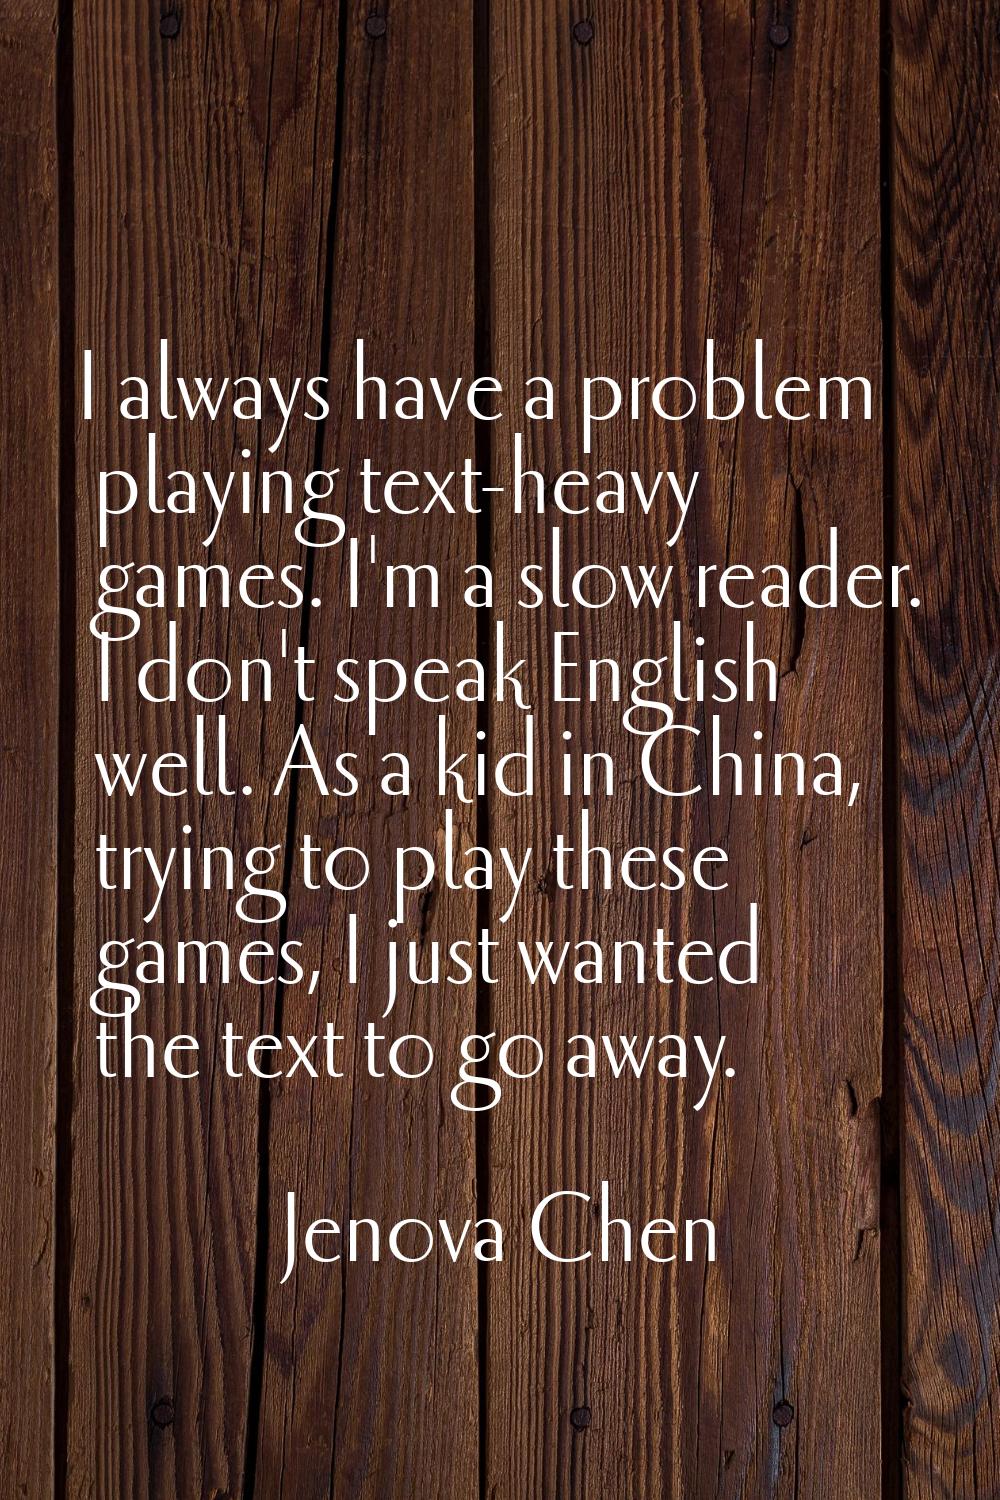 I always have a problem playing text-heavy games. I'm a slow reader. I don't speak English well. As